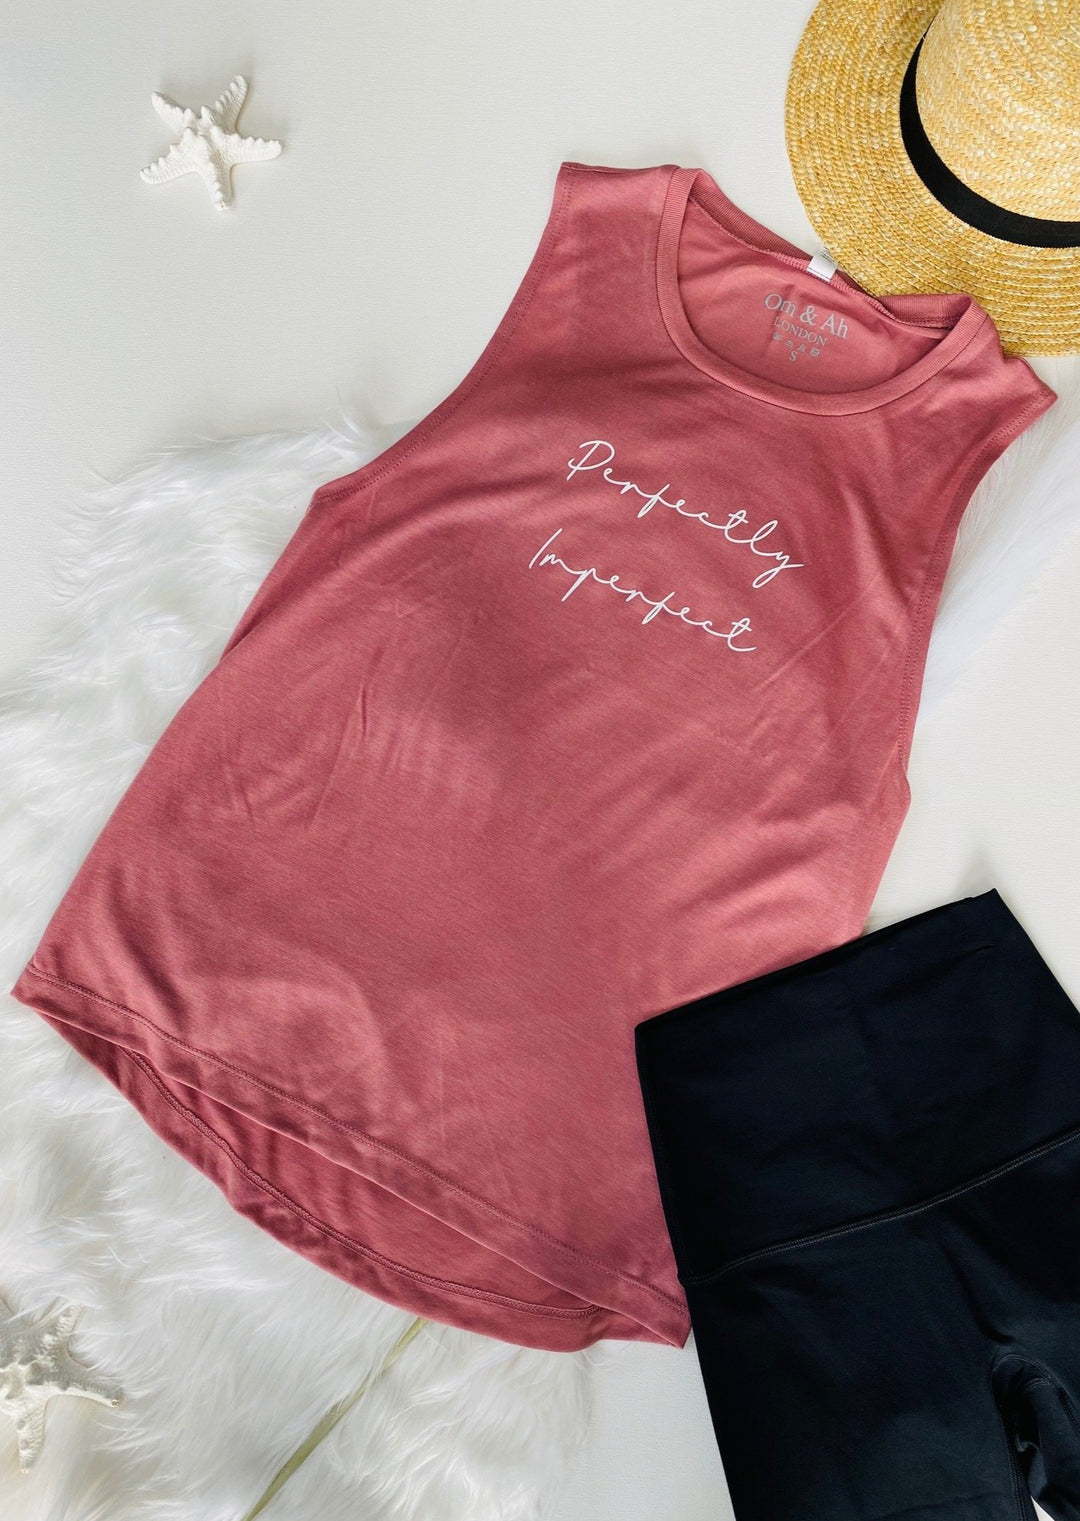 "PERFECTLY IMPERFECT" LOUNGE TANK